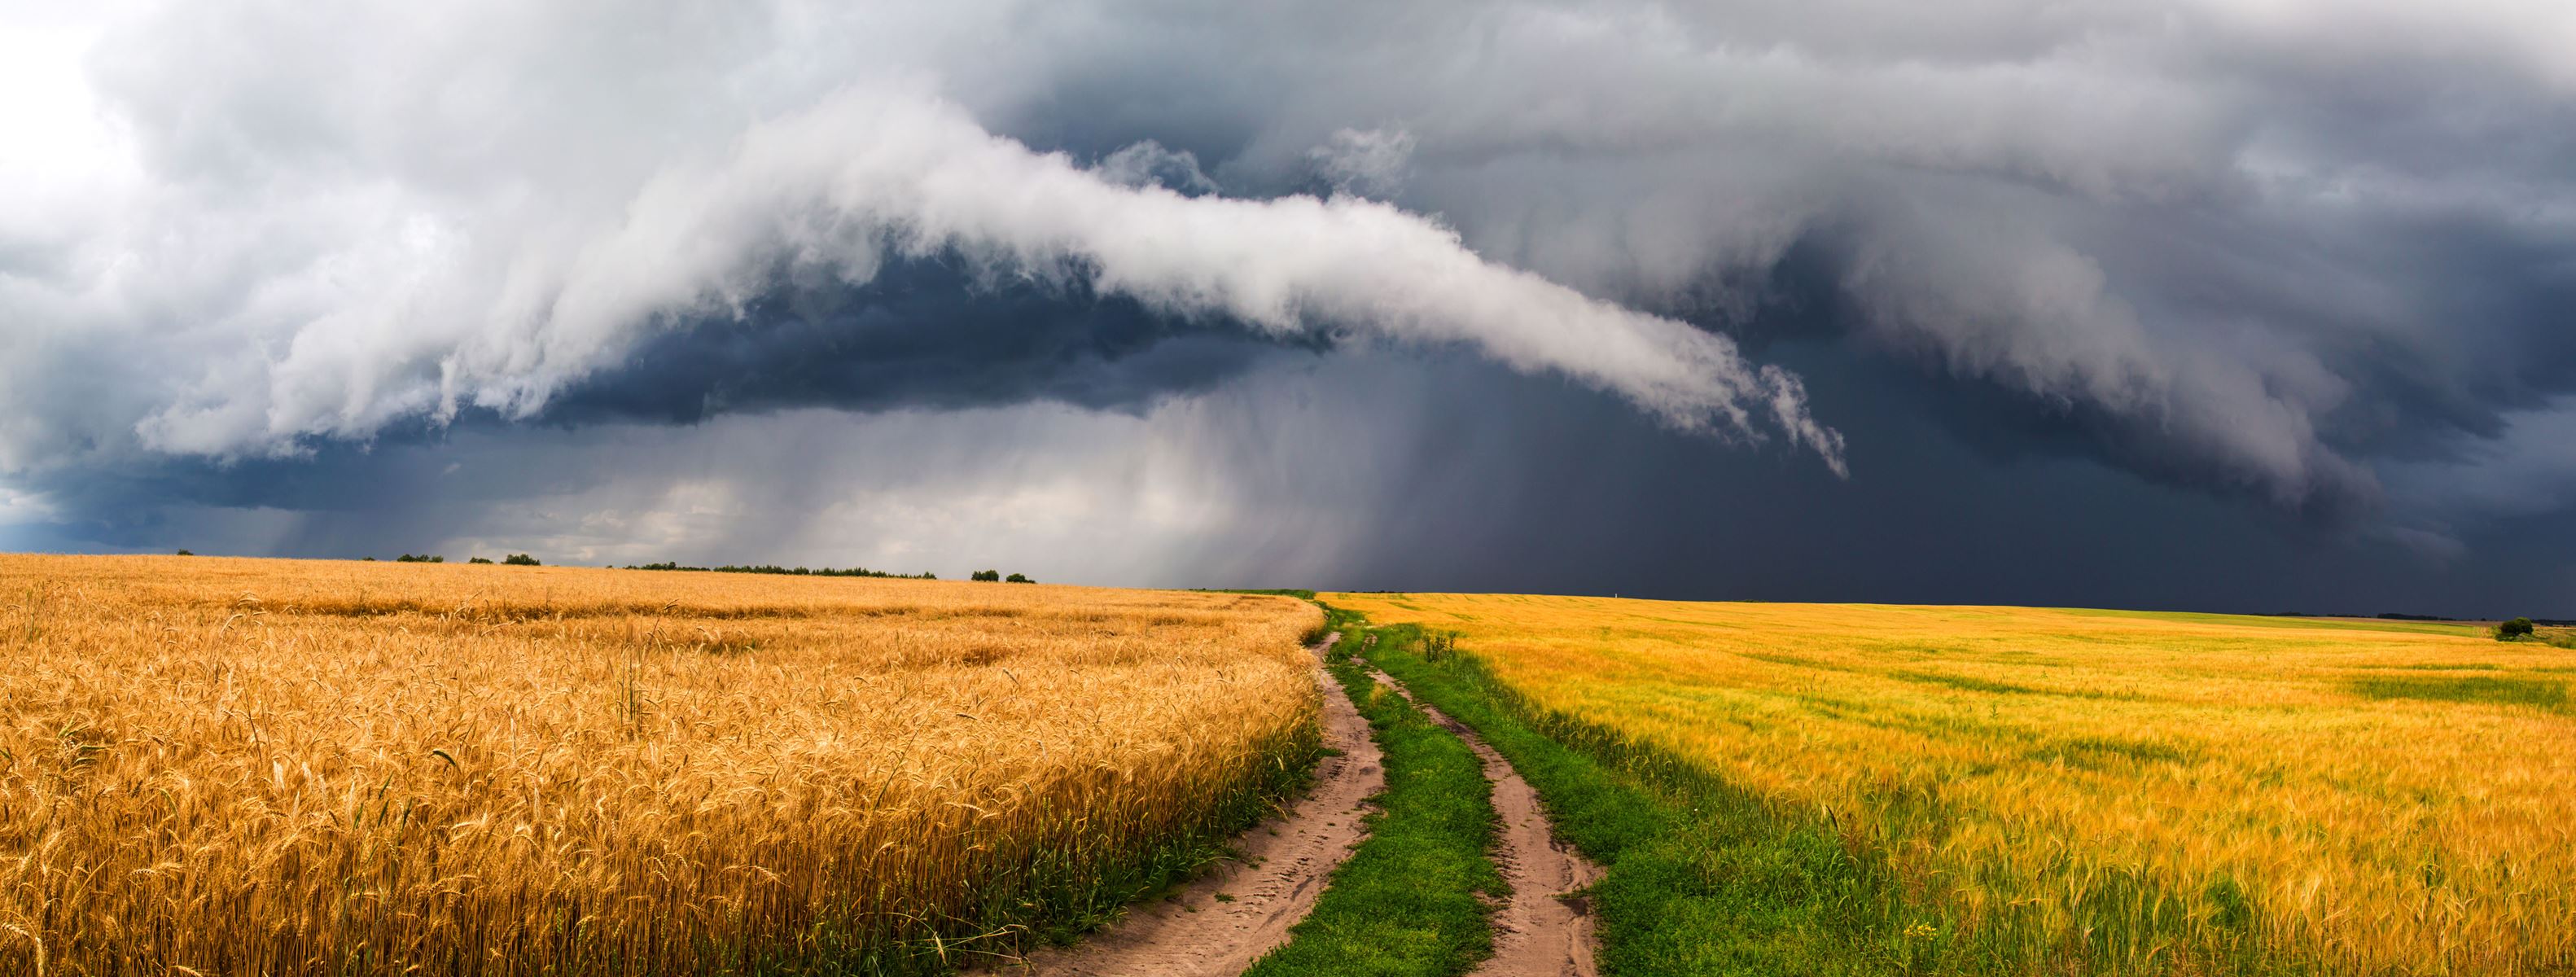 stormy sky over a dirt road between wheat fields